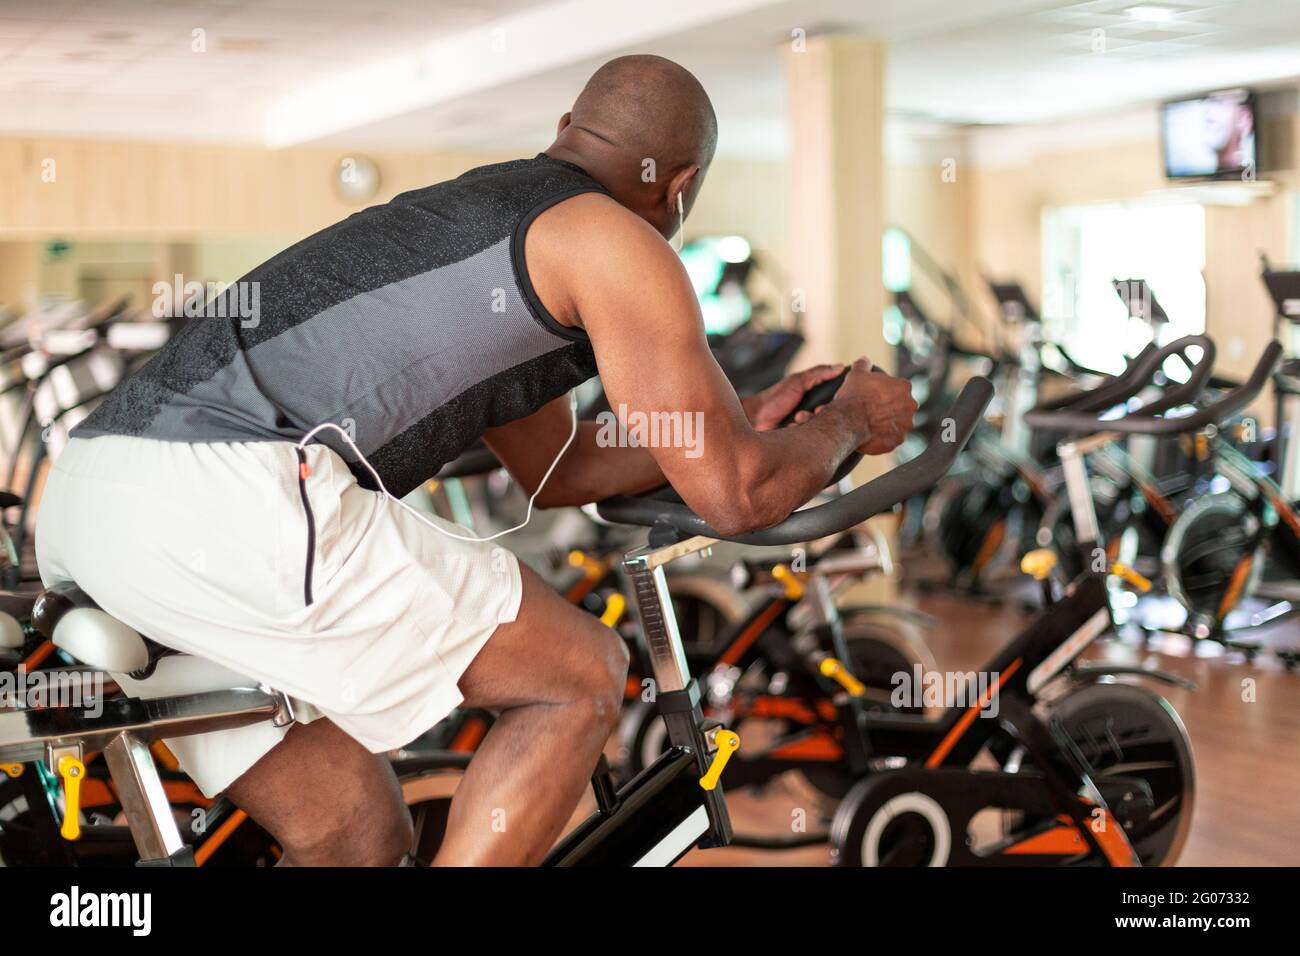 View of unrecognizable black person doing exercise bike in fitness center. Healthy lifestyle concept. Stock Photo